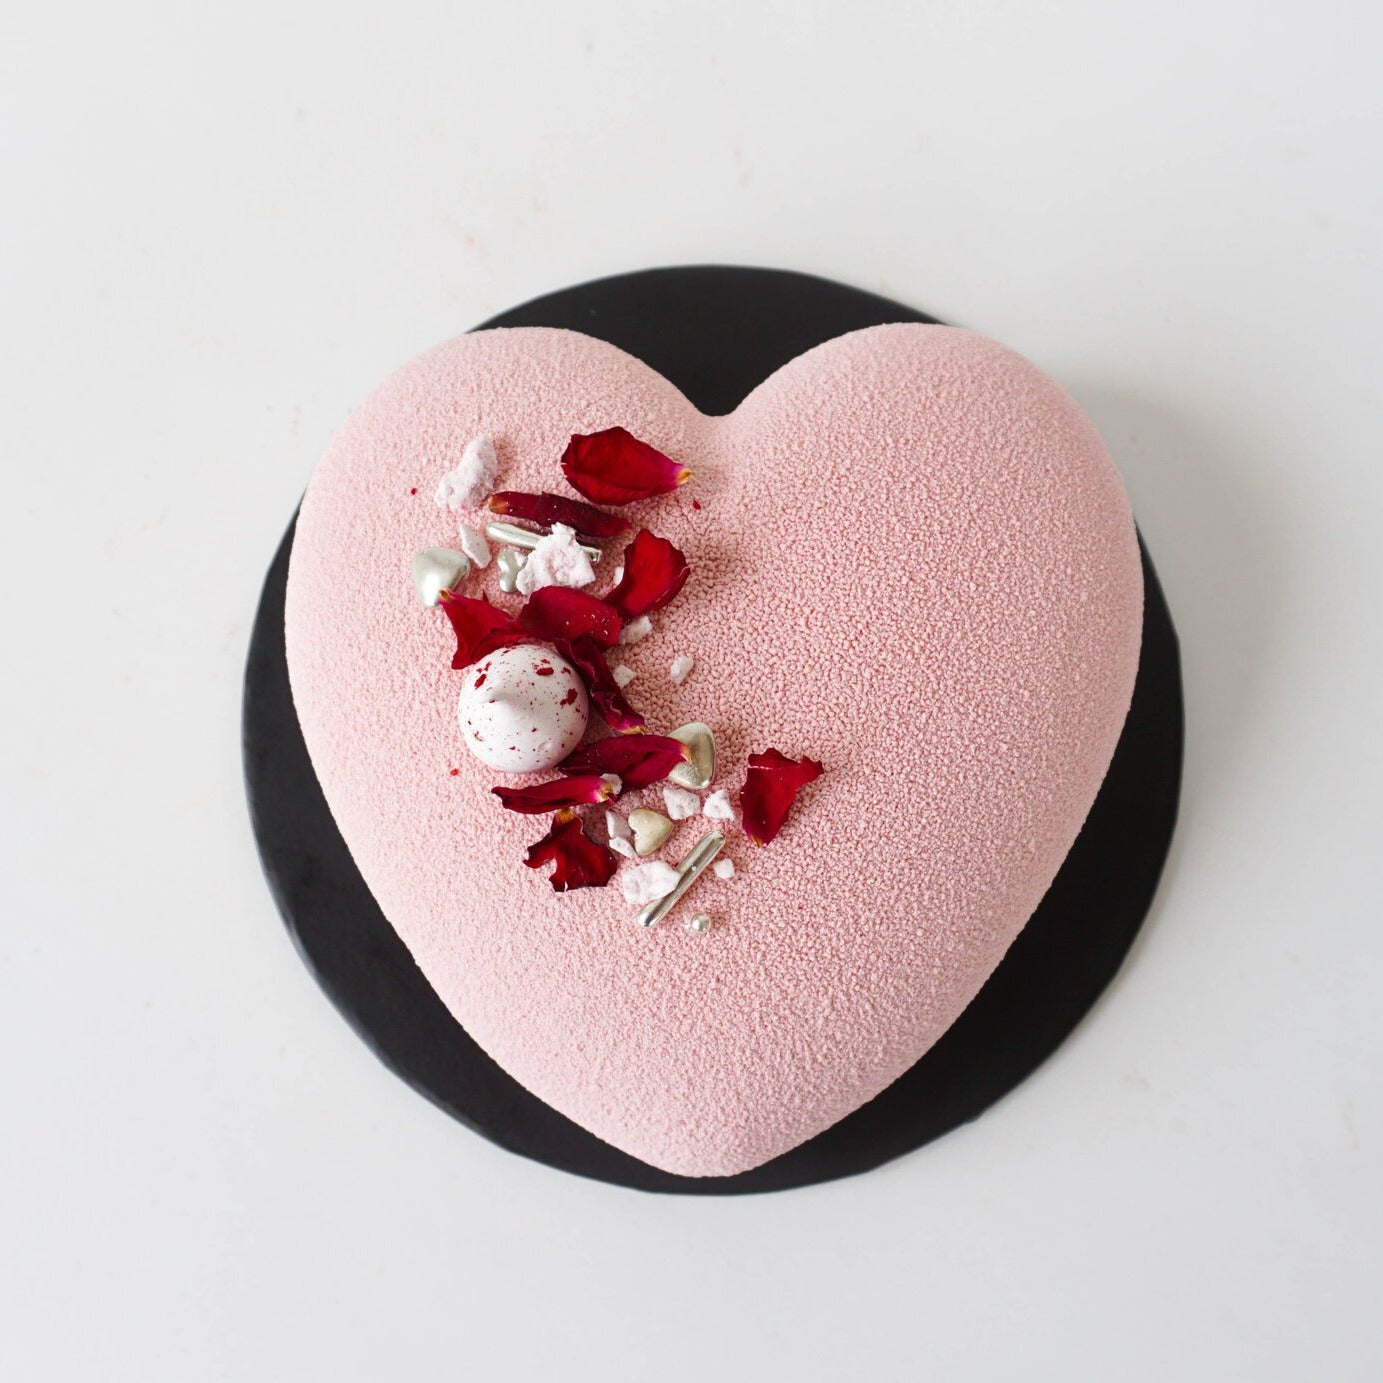 lychee raspberry mousse cake 7 INCH